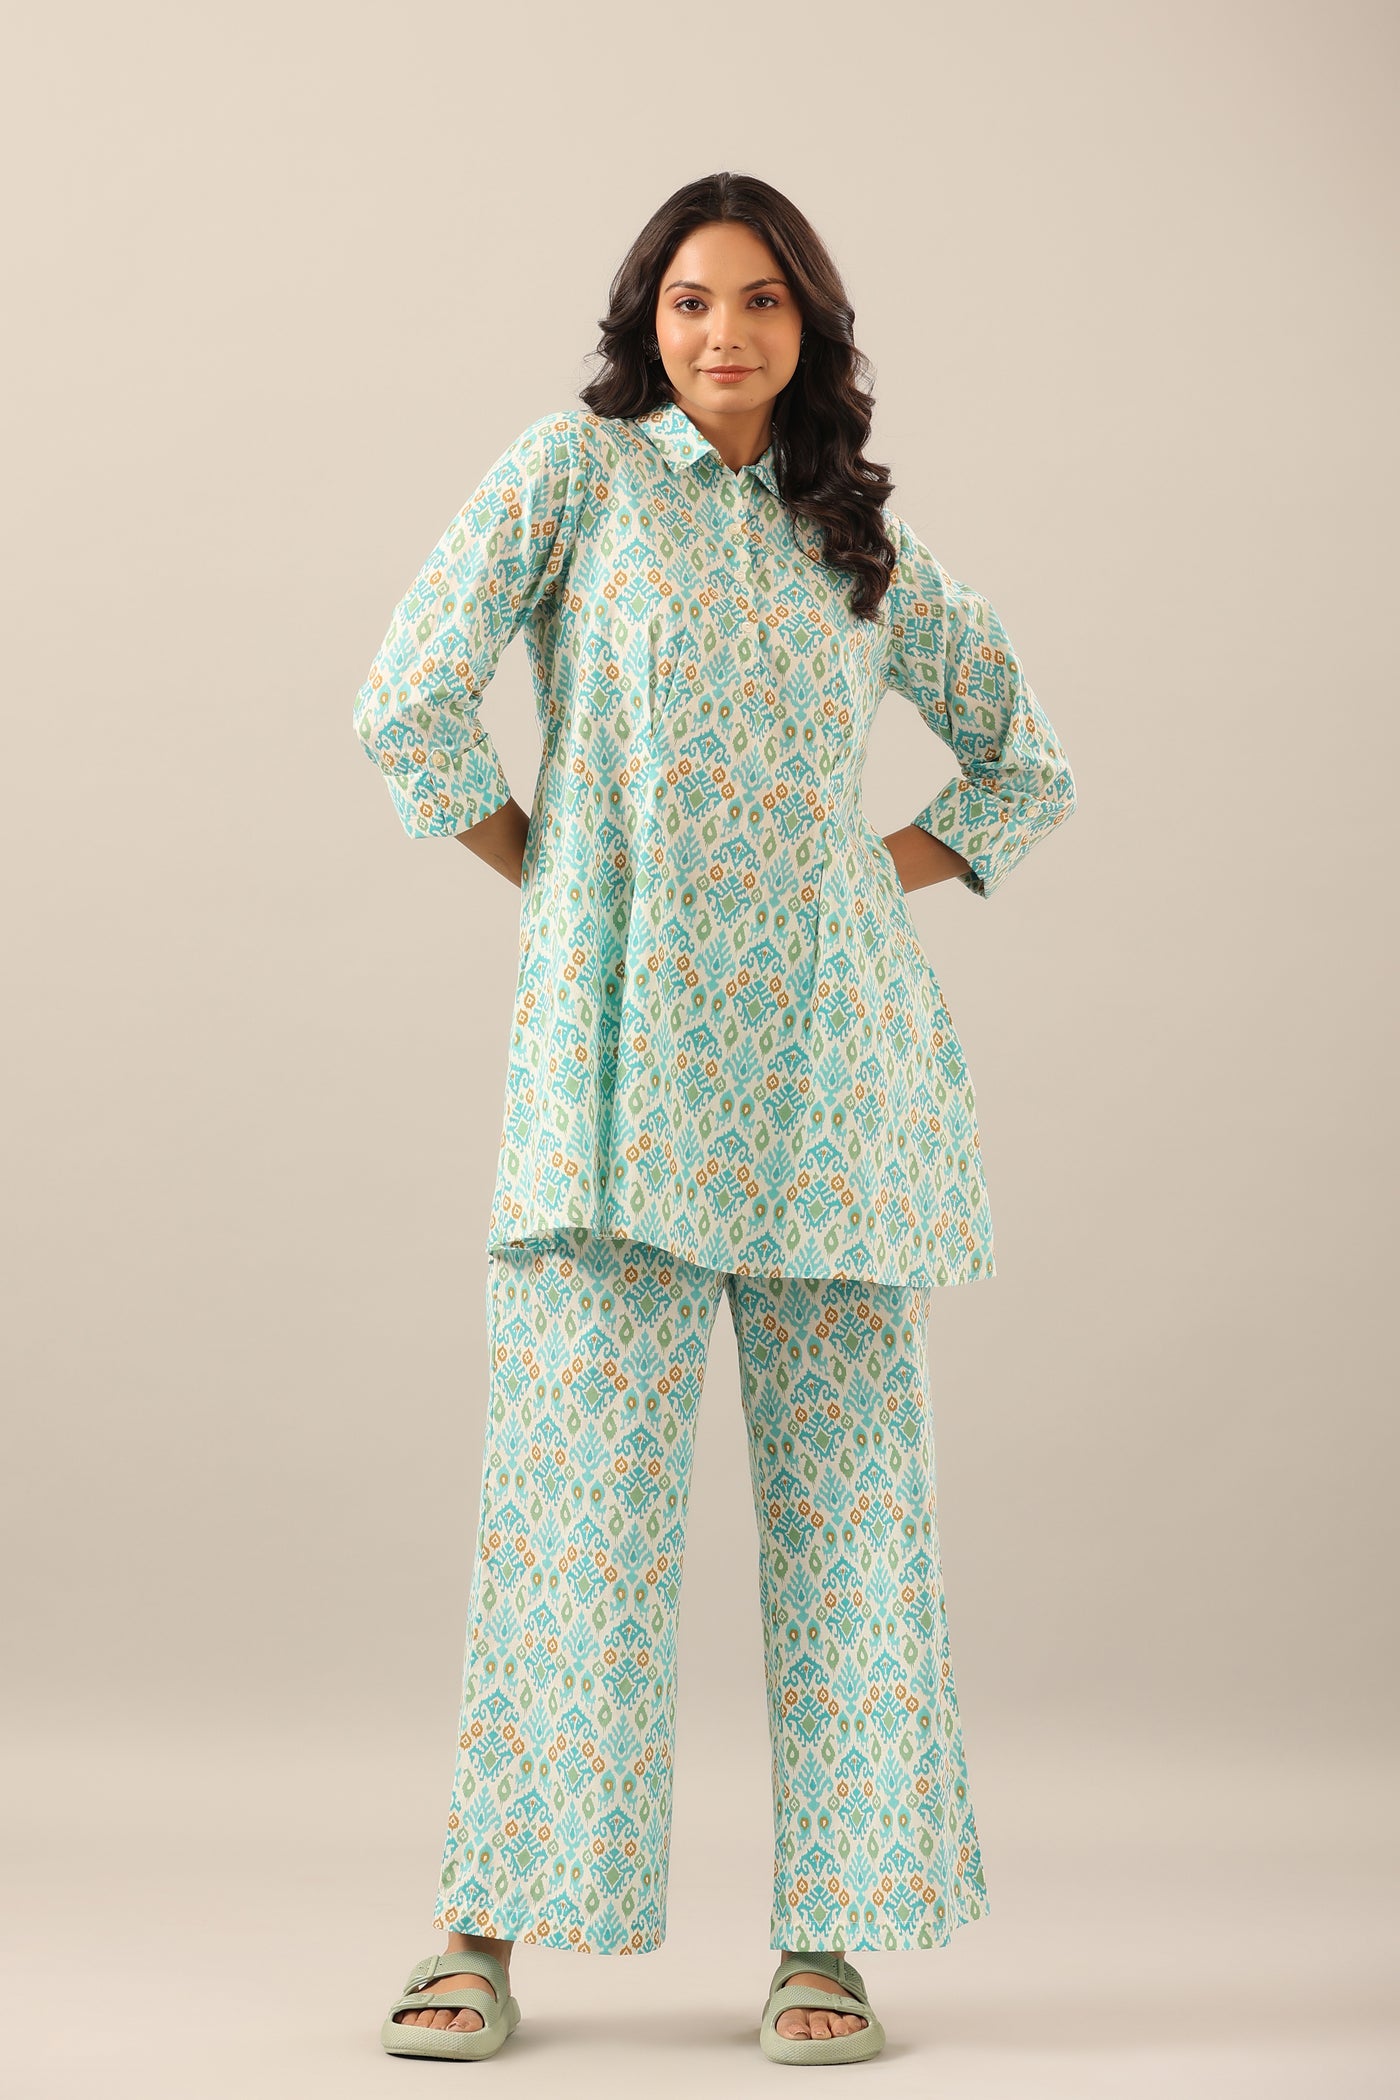 Ikat on White Cotton Collared Lounge Co-ord Set